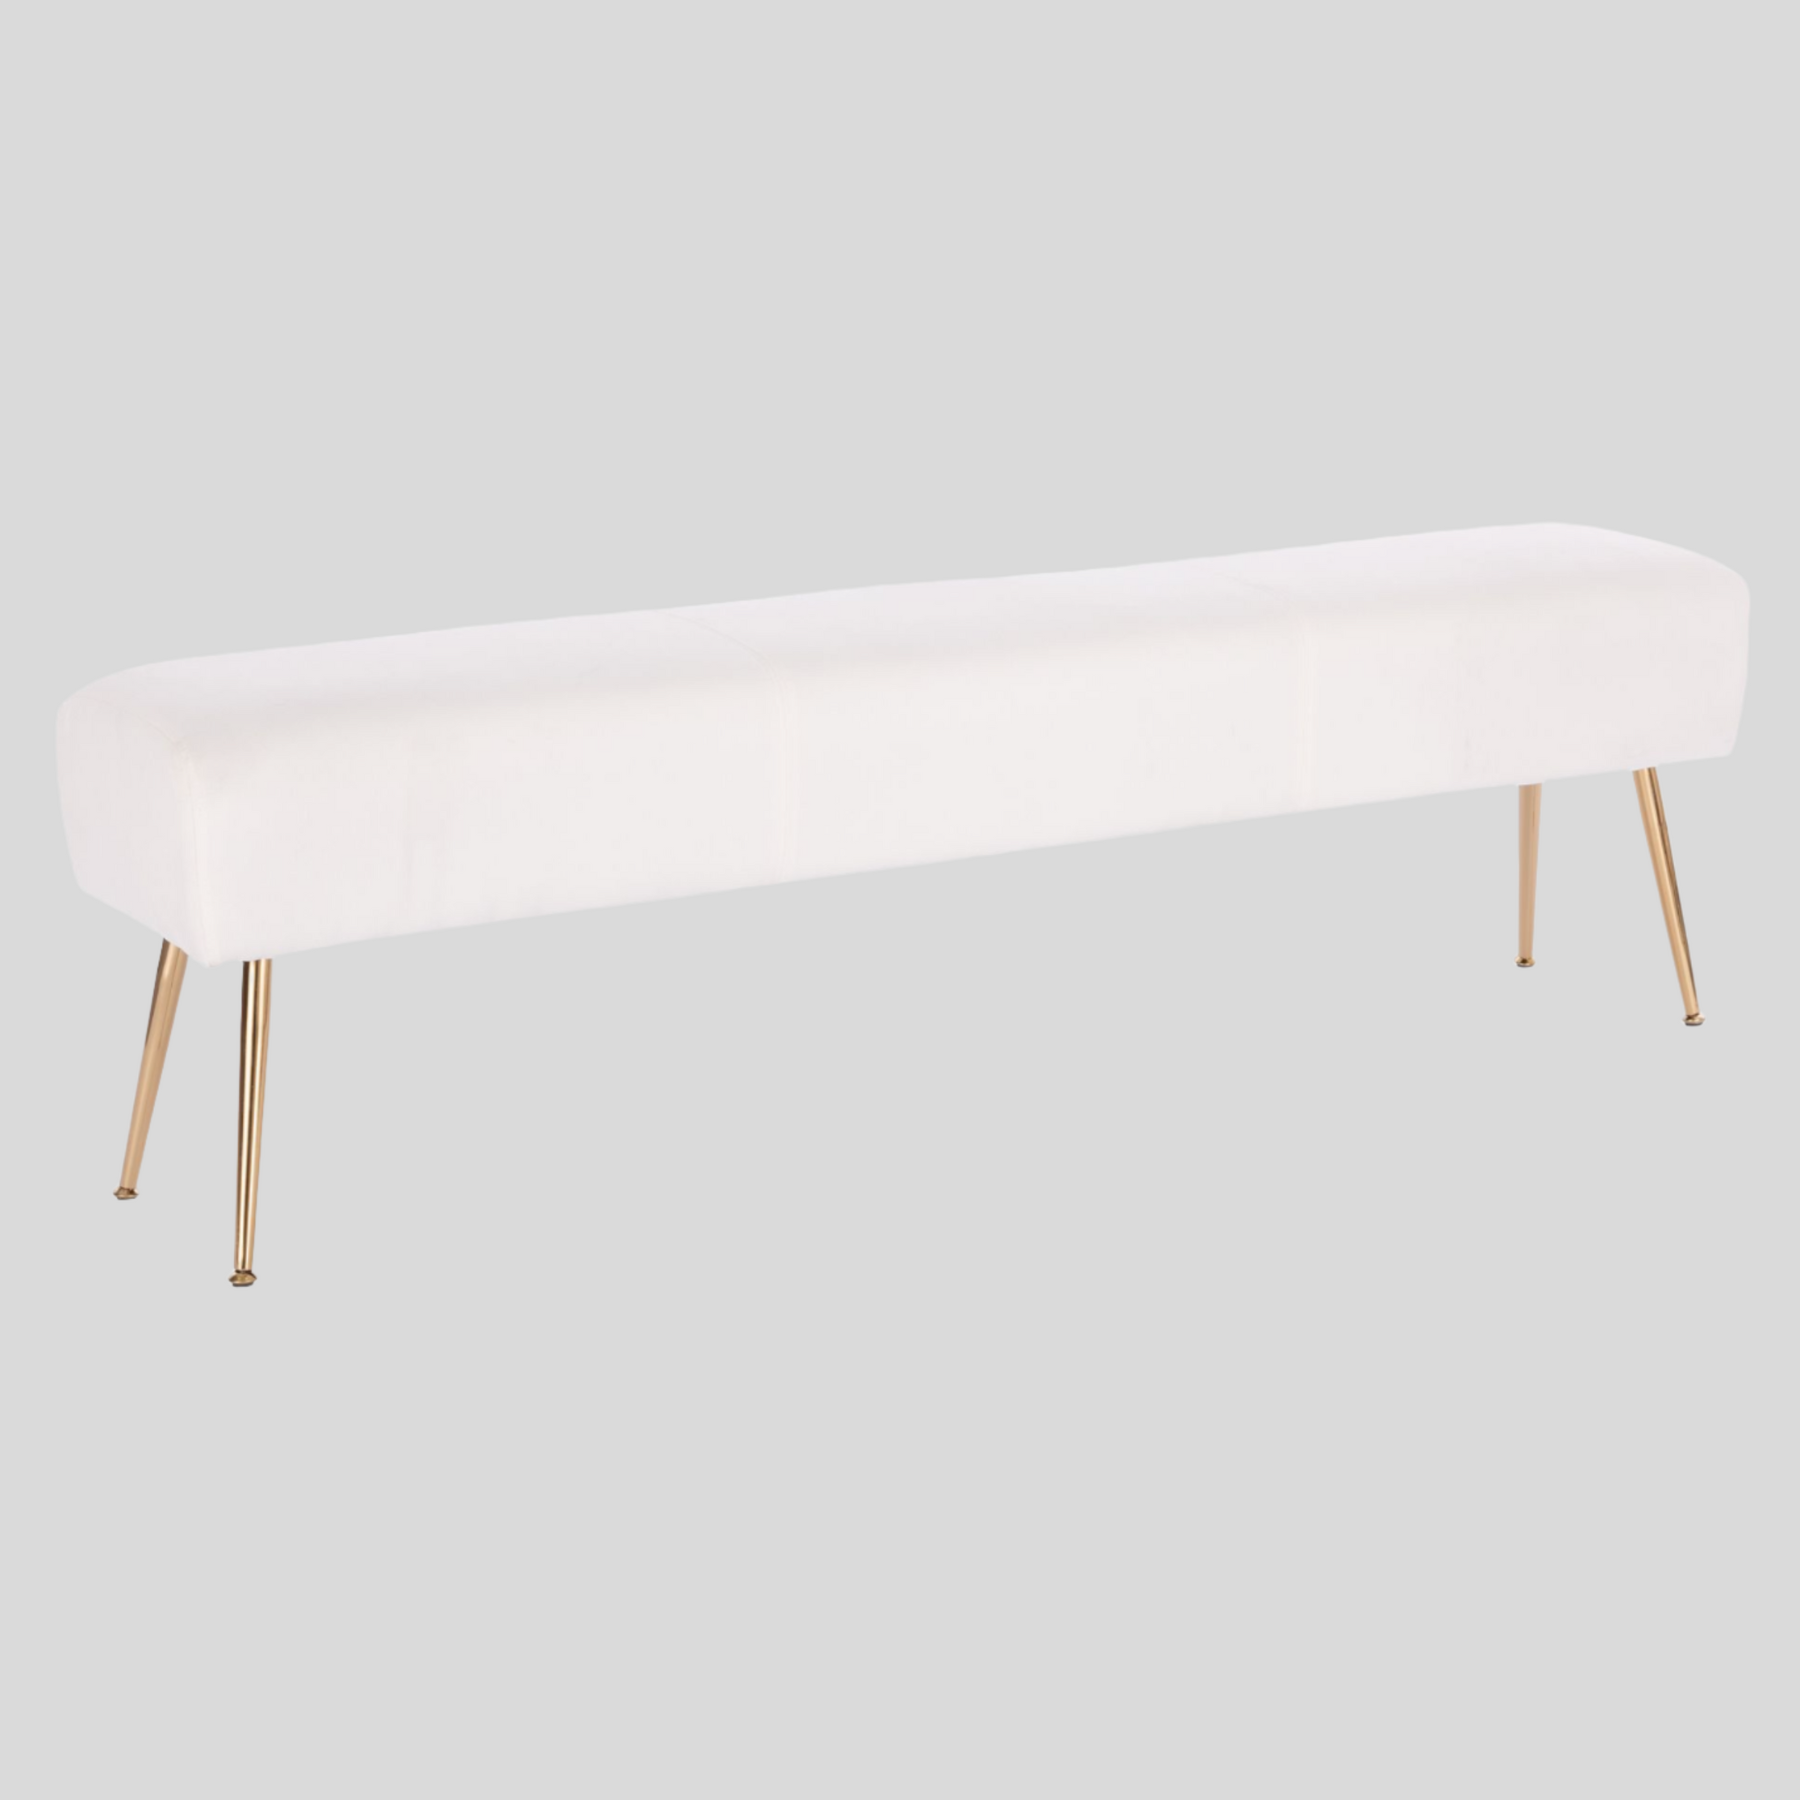 O'Donell Linen Bench